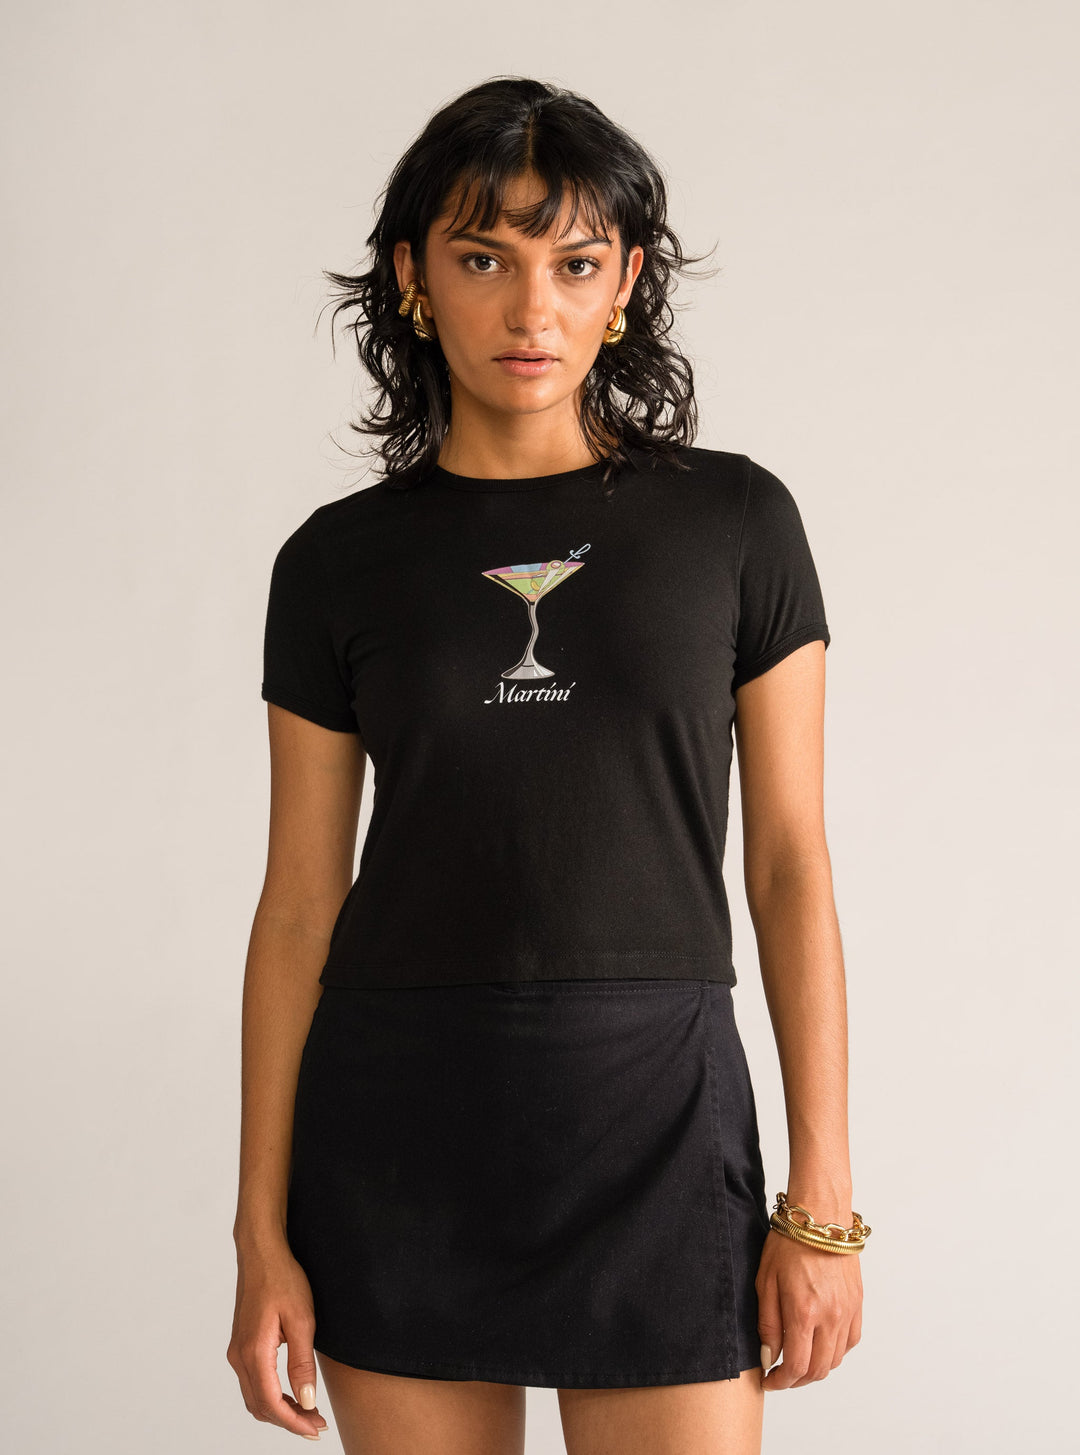 Martini For The Girlies Tee, Black